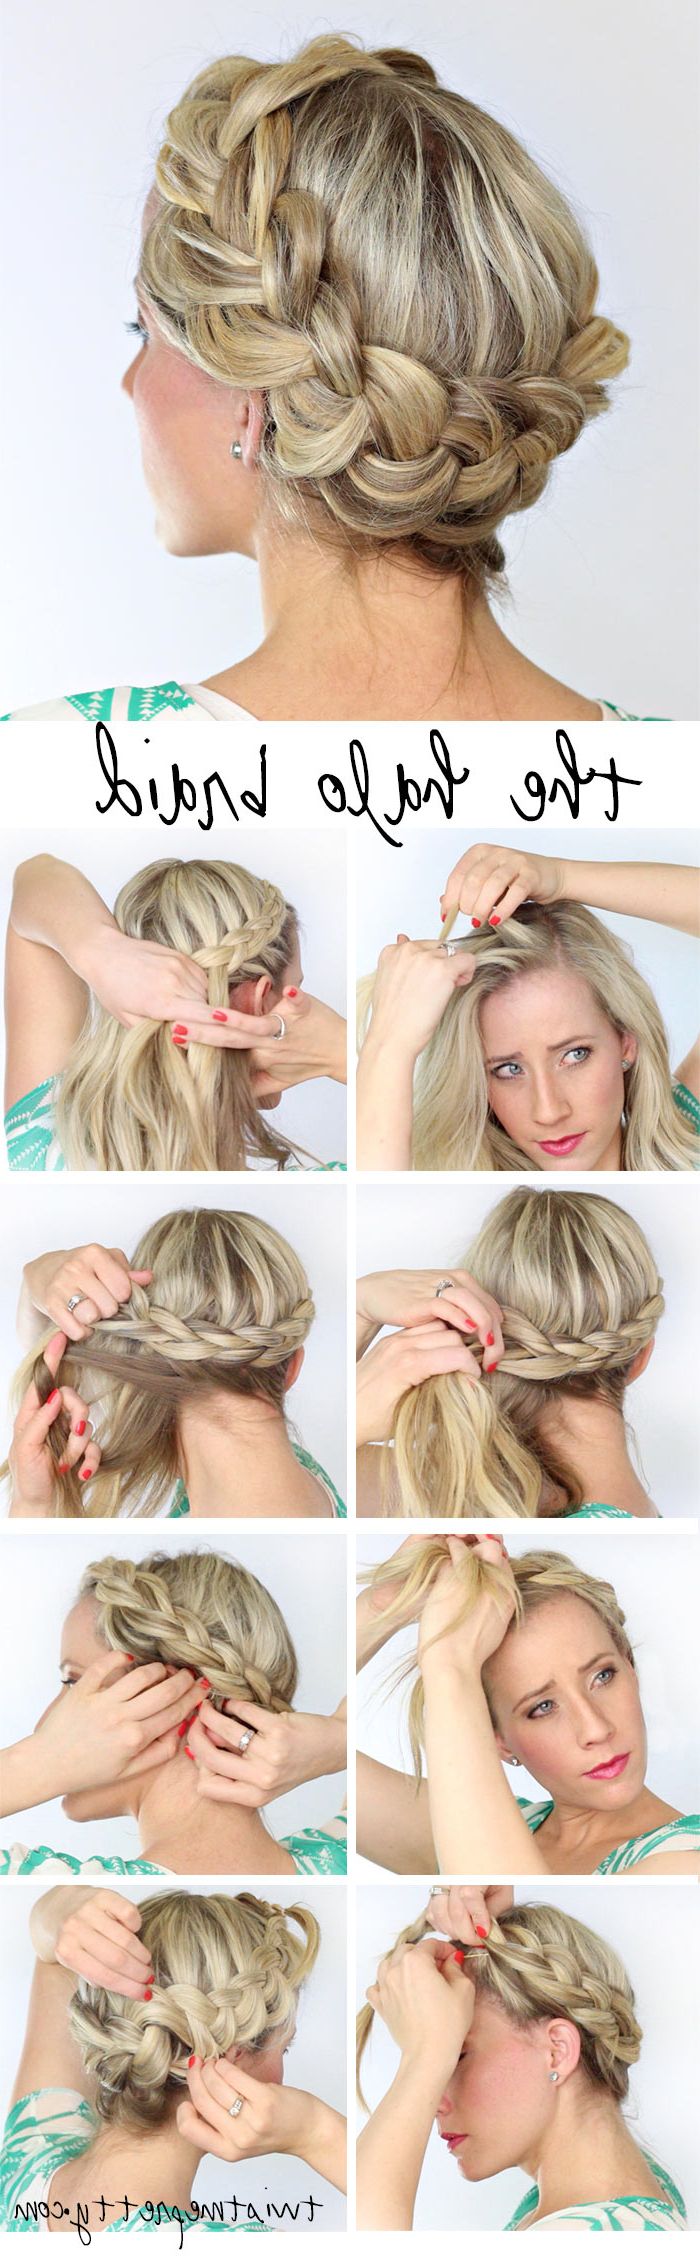 A Fat Halo Braid – Twist Me Pretty Intended For Fashionable Halo Braided Hairstyles (View 10 of 20)